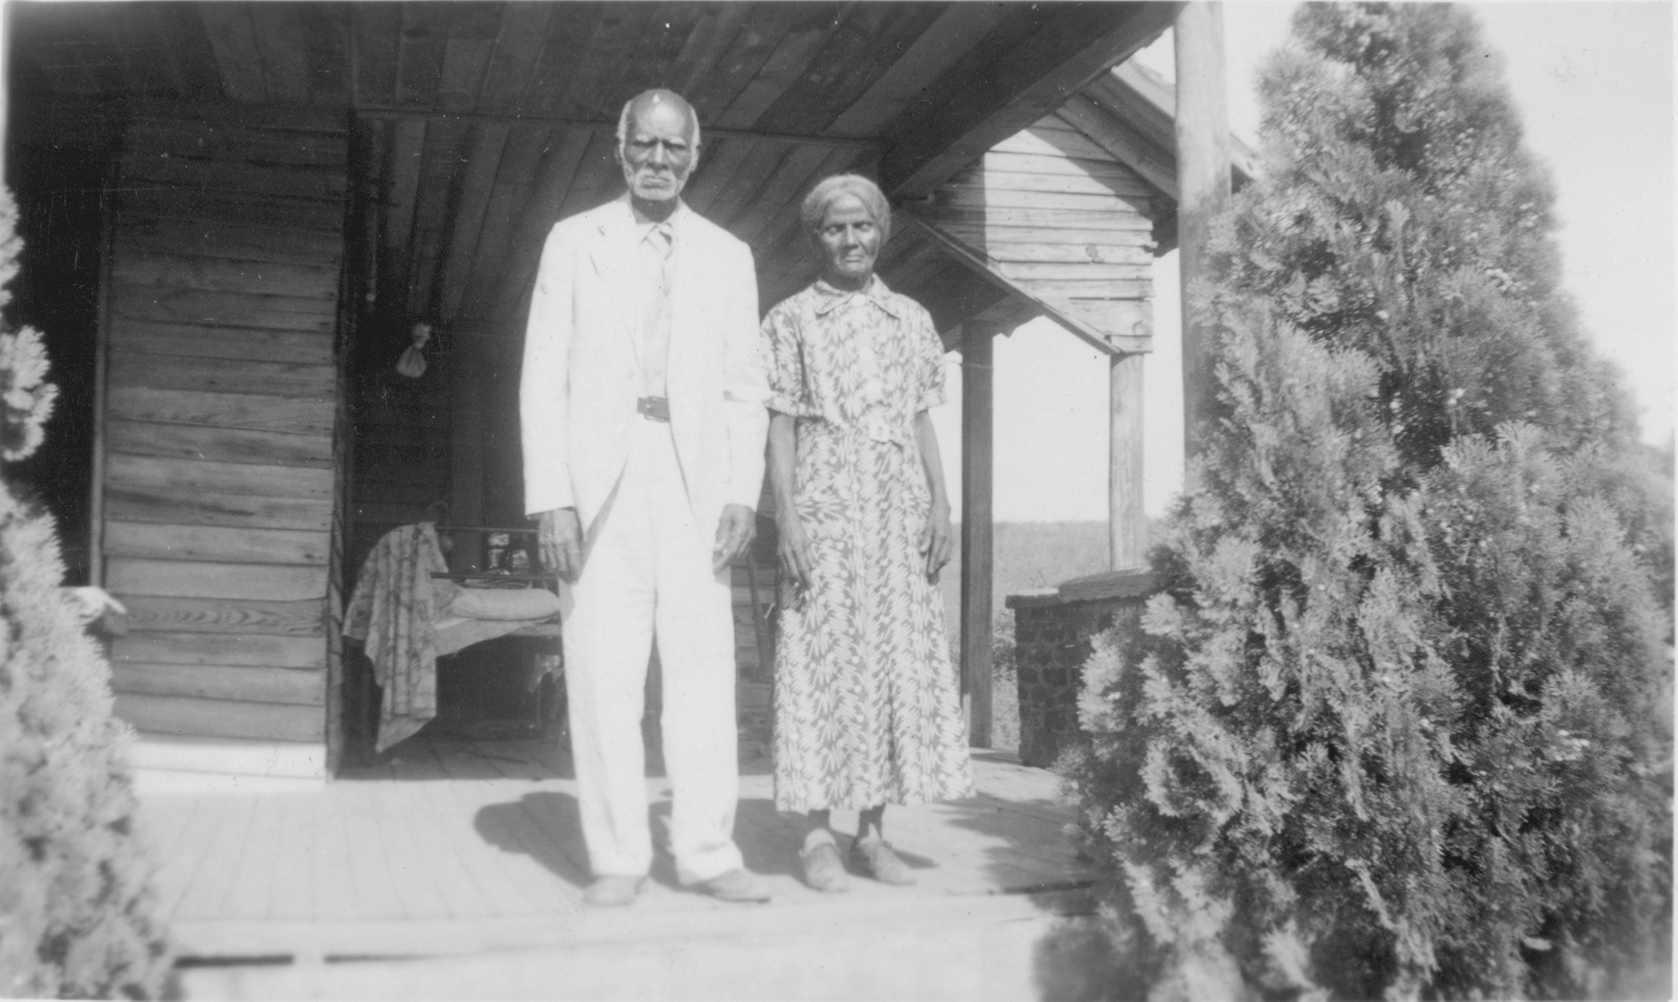 black and white photo of formally attired elderly Black couple standing in front of wooden house